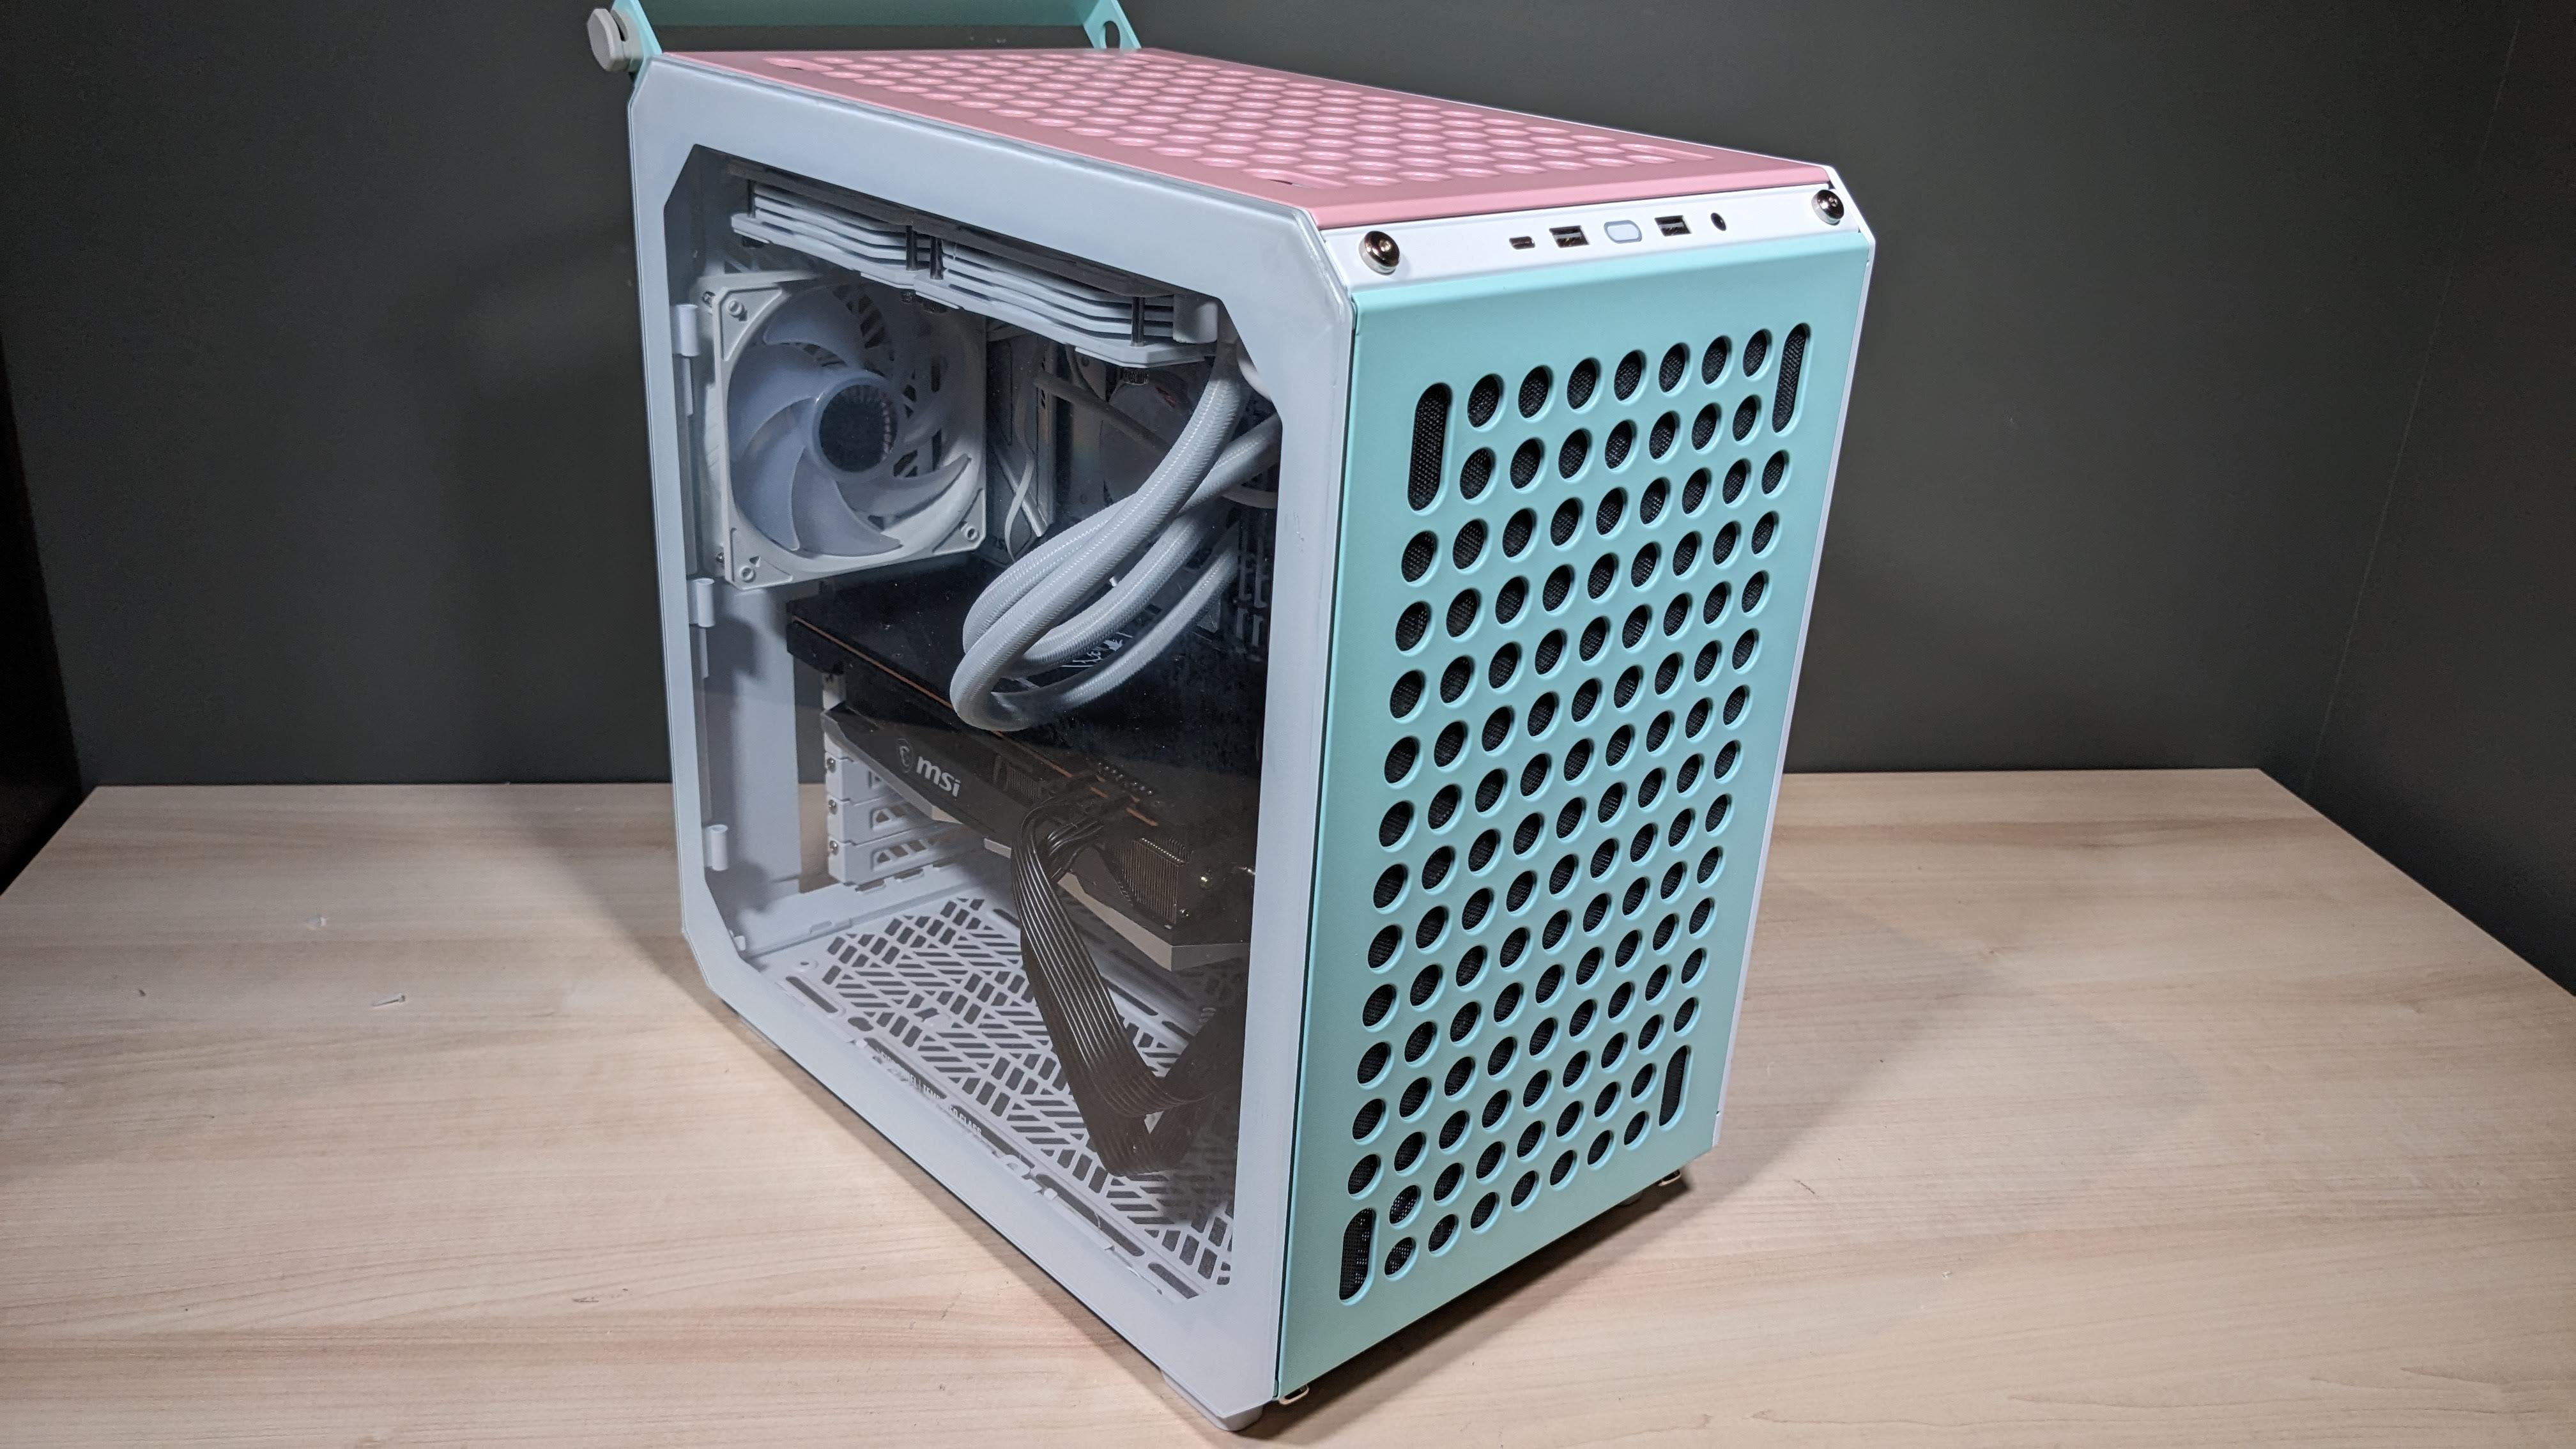 Corsair Build Kit Impressions: If You Build It, Cable Management Will Come  (Maybe)